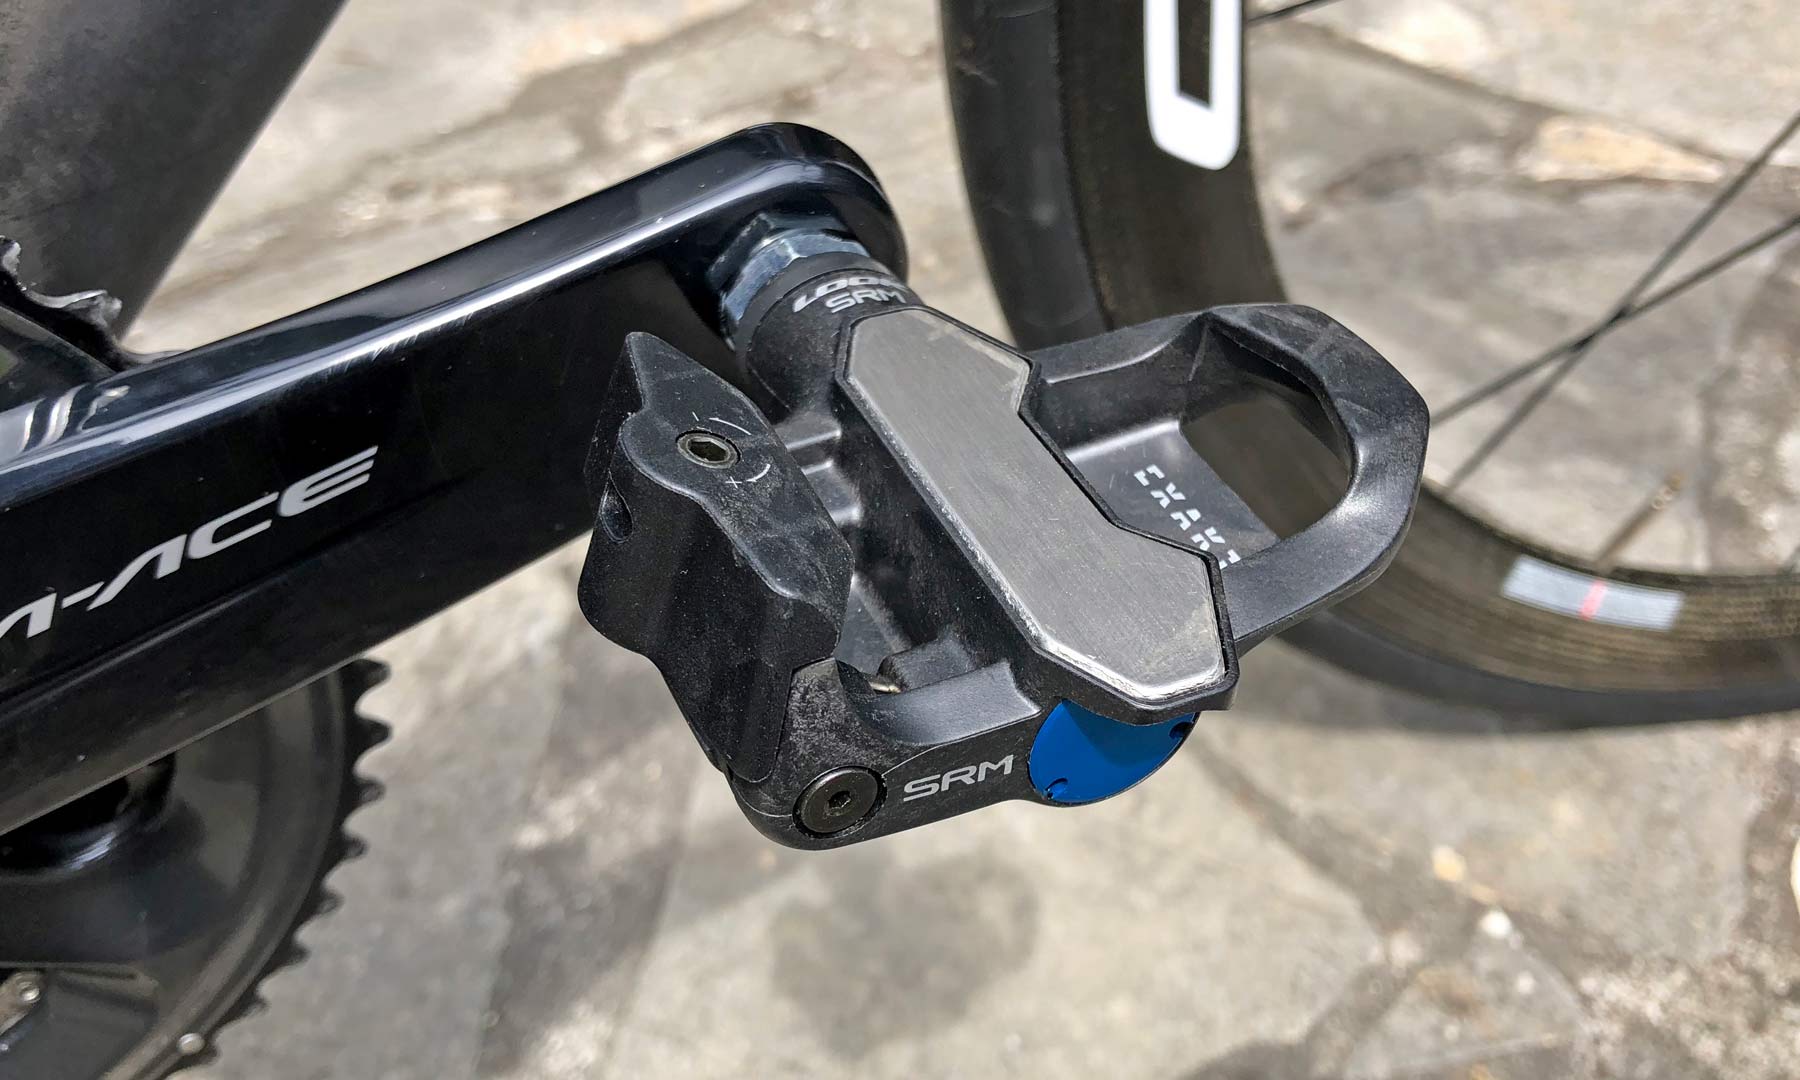 Look & SRM partner on low-profile, highly-accurate Exakt power meter pedals